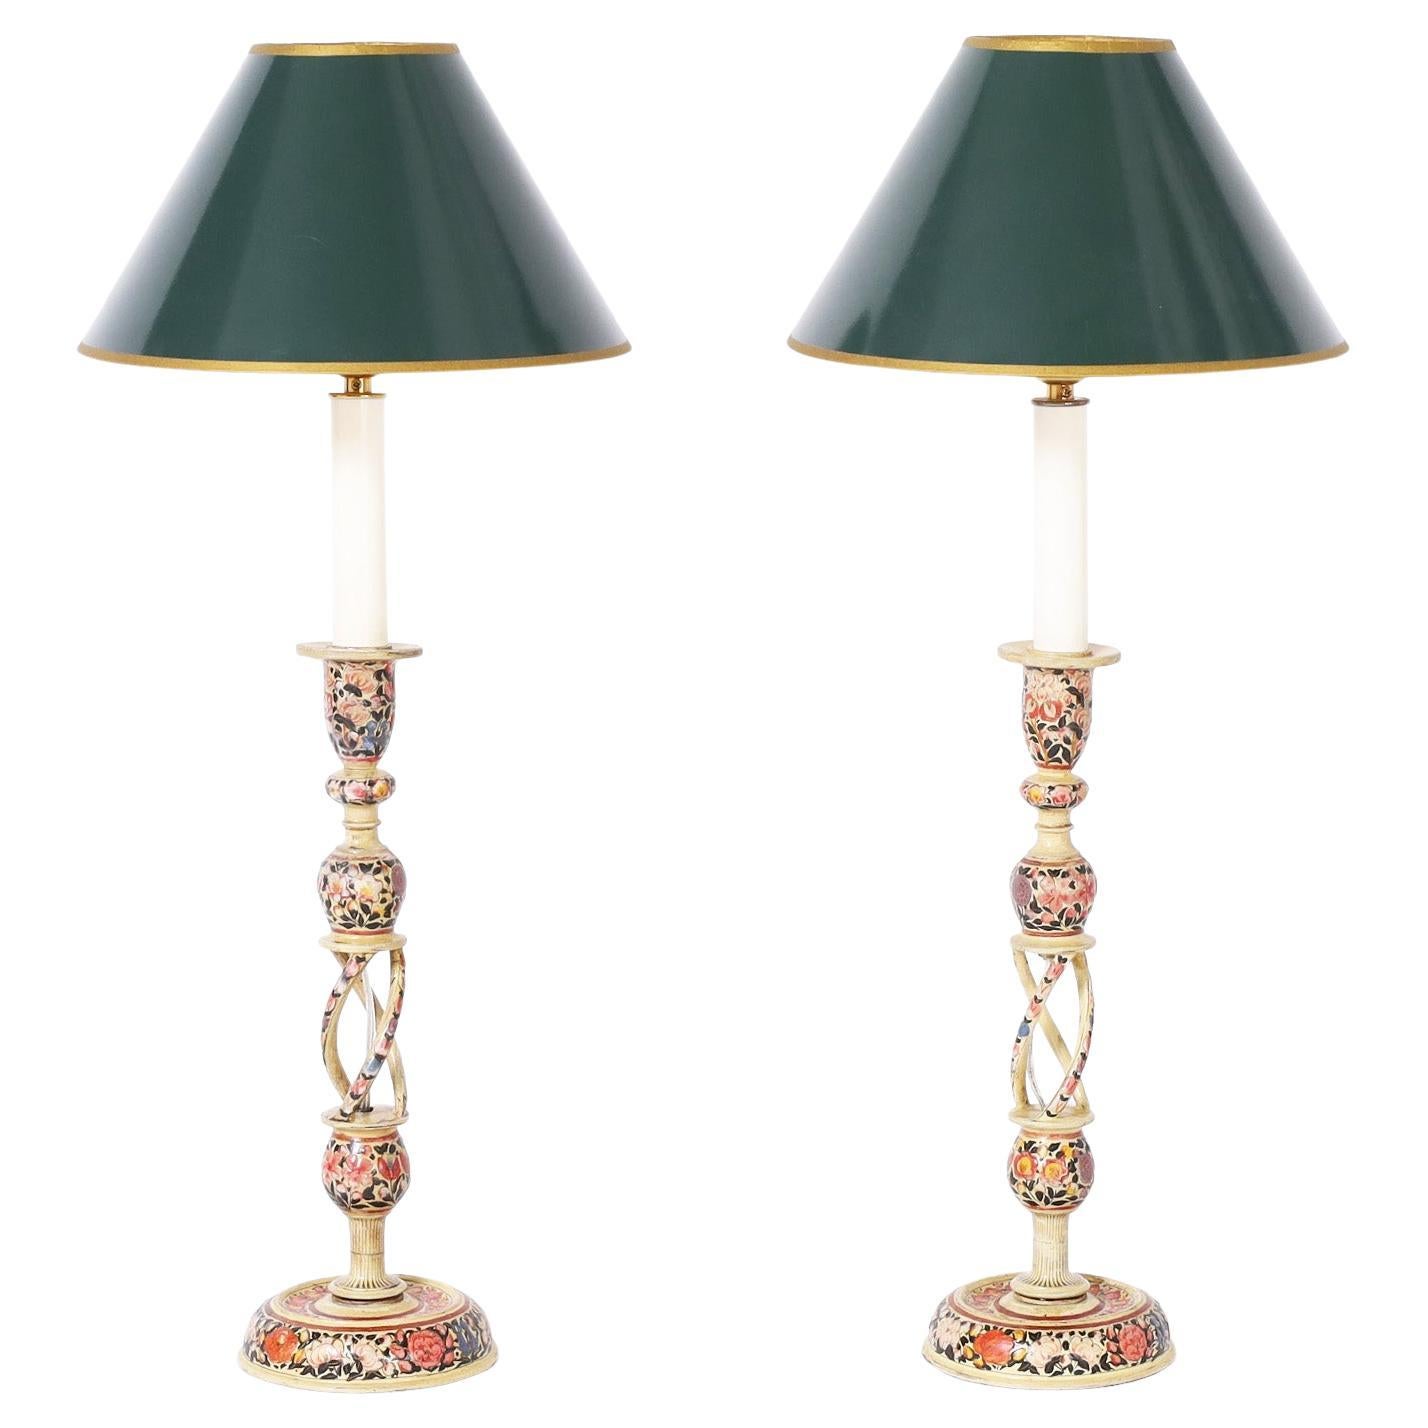 Pair of Kashmiri Candlestick Table Lamps